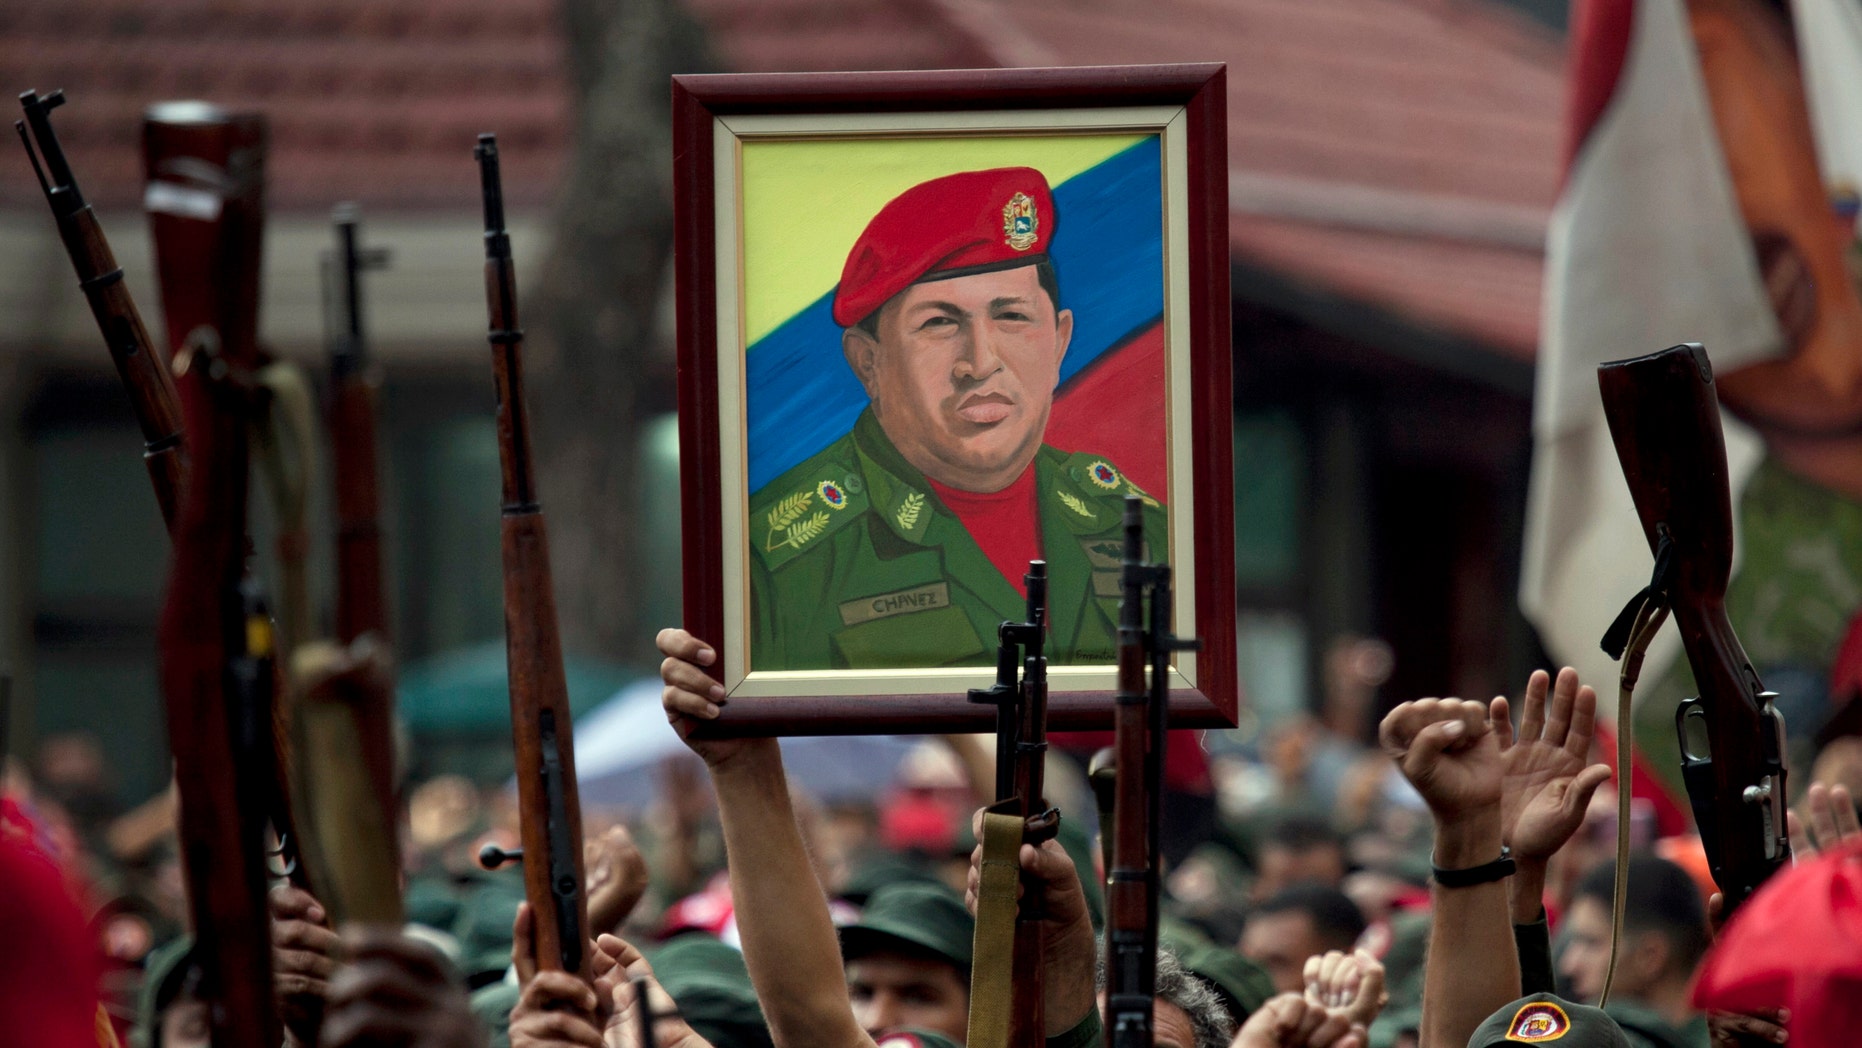 In this April 13, 2010 file photo, members of the National Revolutionary Militia hold up their weapons and a painting of Venezuela's President Hugo Chavez at an event marking the 9th anniversary of Chavez's return to power after a failed 2002 coup, in Caracas, Venezuela. (AP Photo/Ariana Cubillos, File)